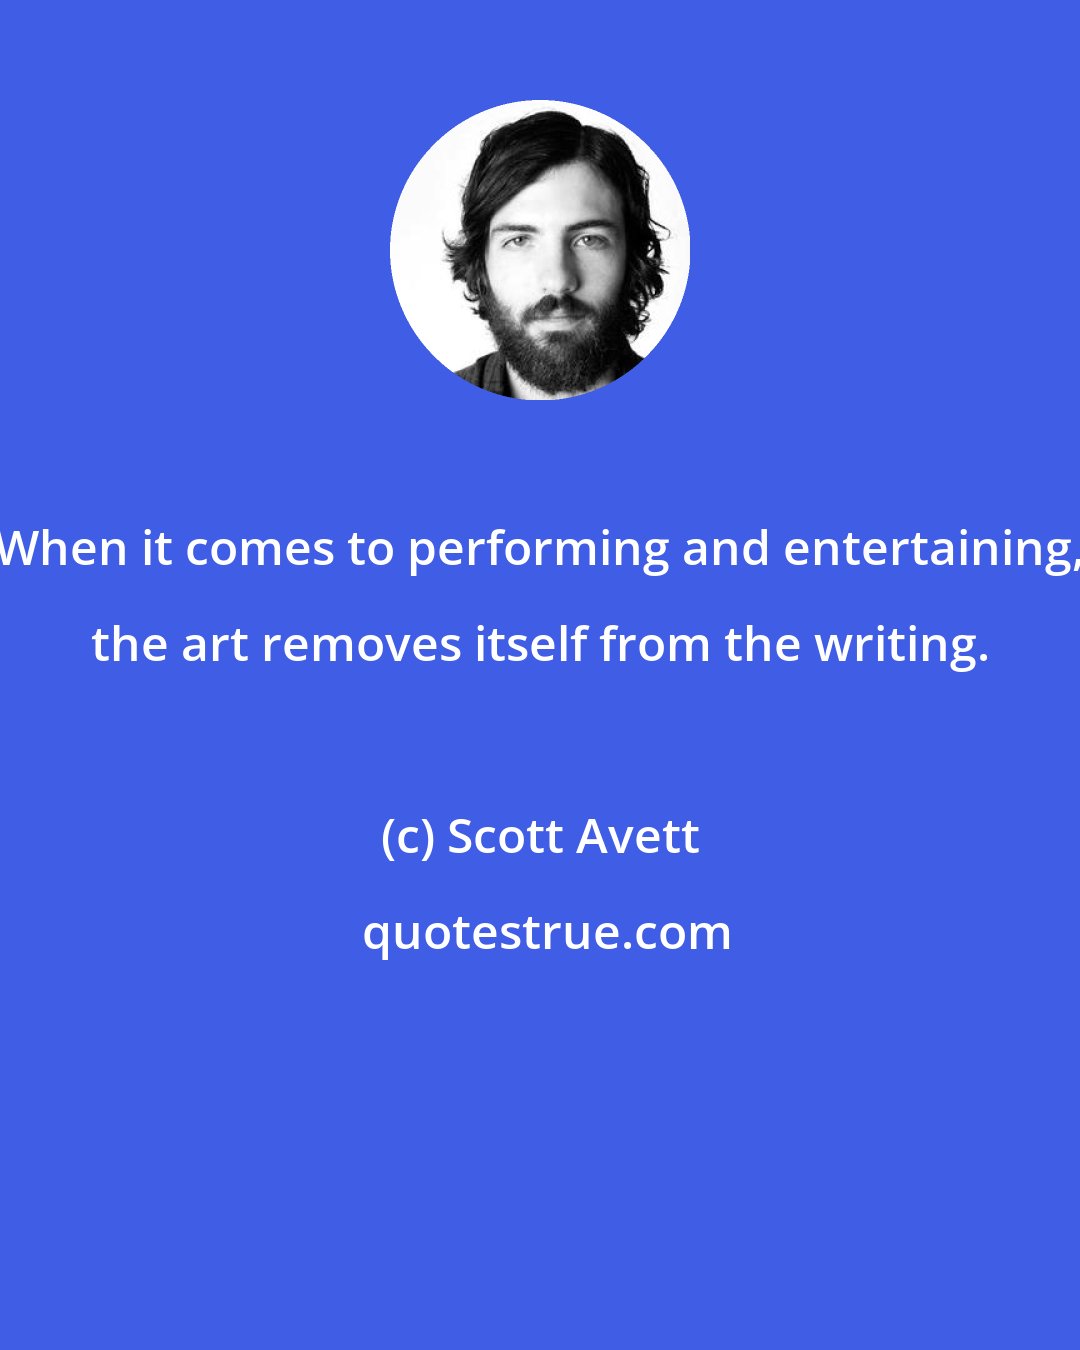 Scott Avett: When it comes to performing and entertaining, the art removes itself from the writing.